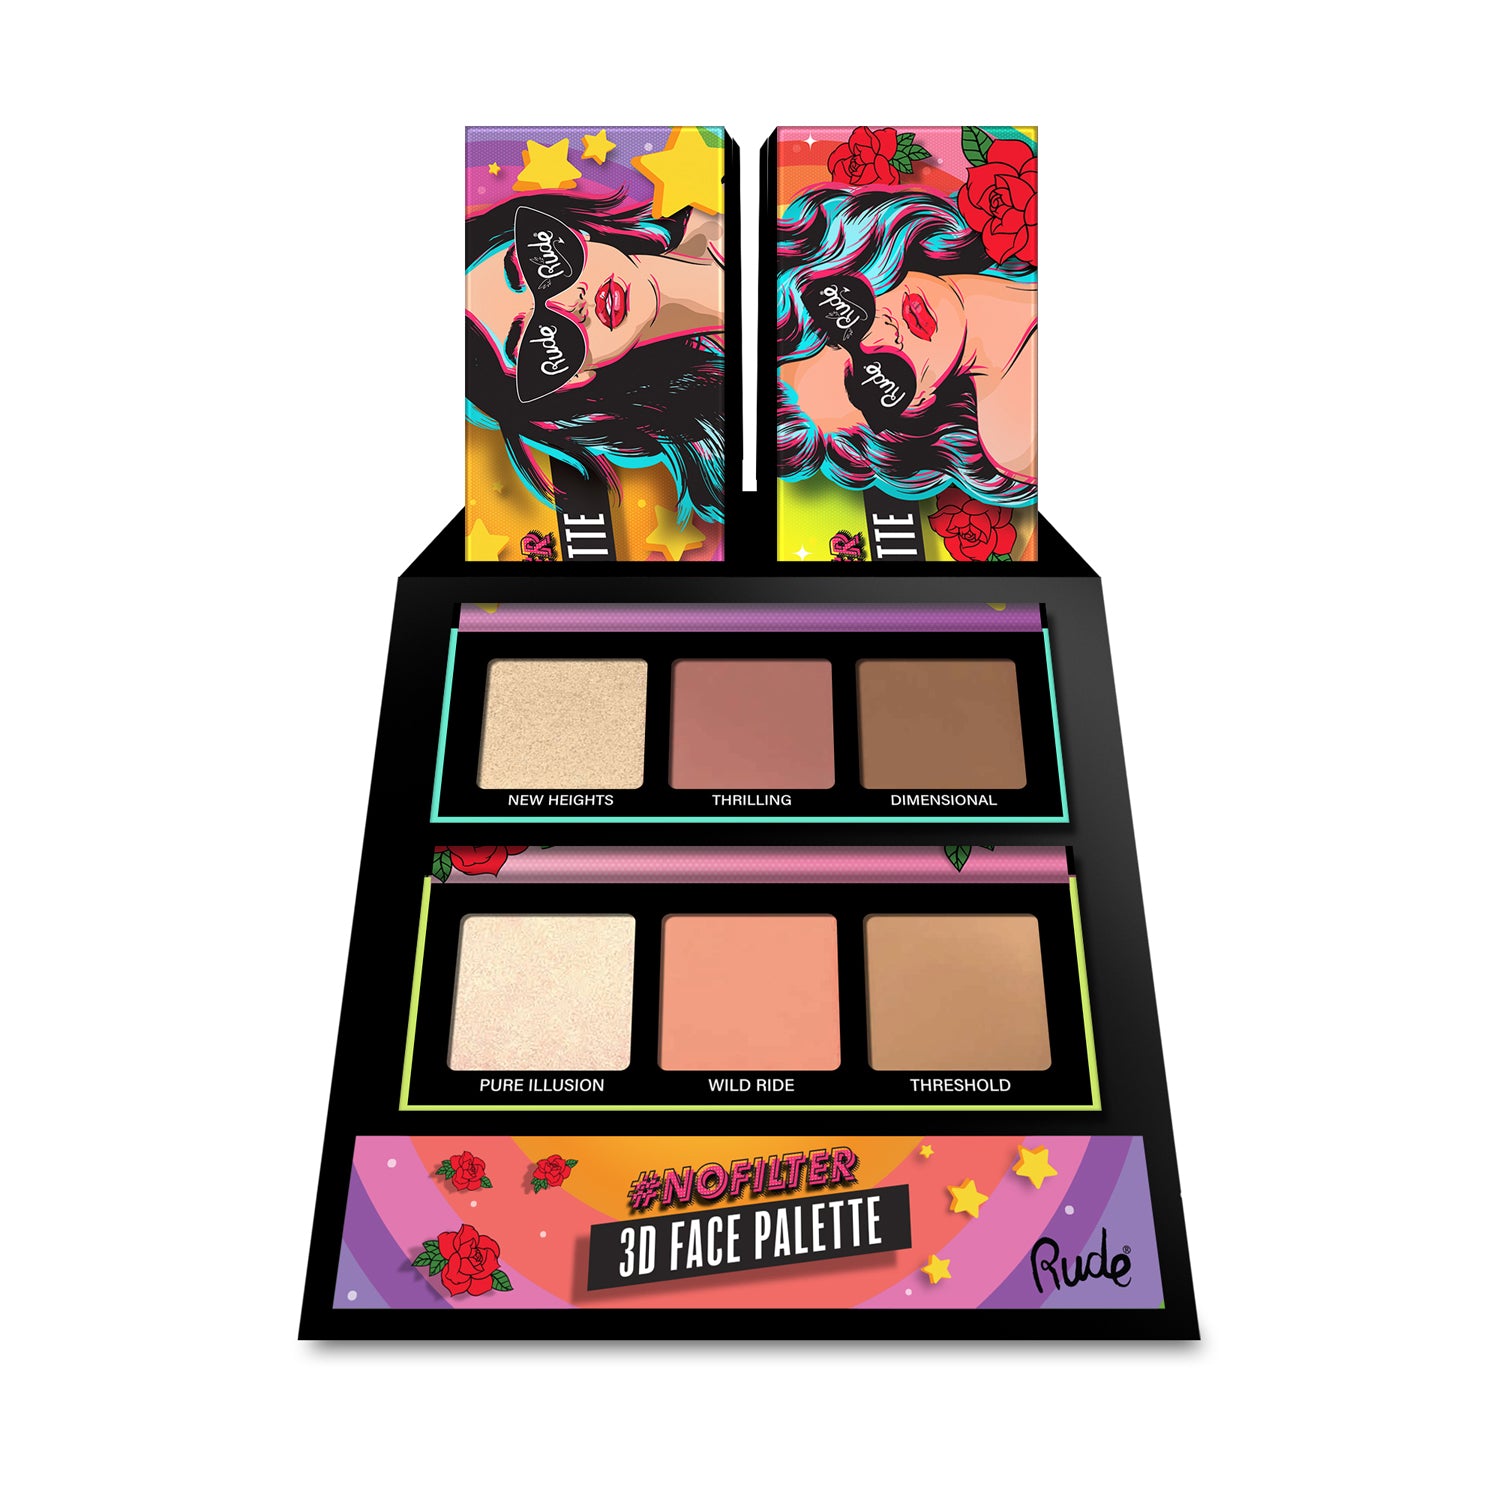 Rude - Nofilter 3D Face Palette - Roses